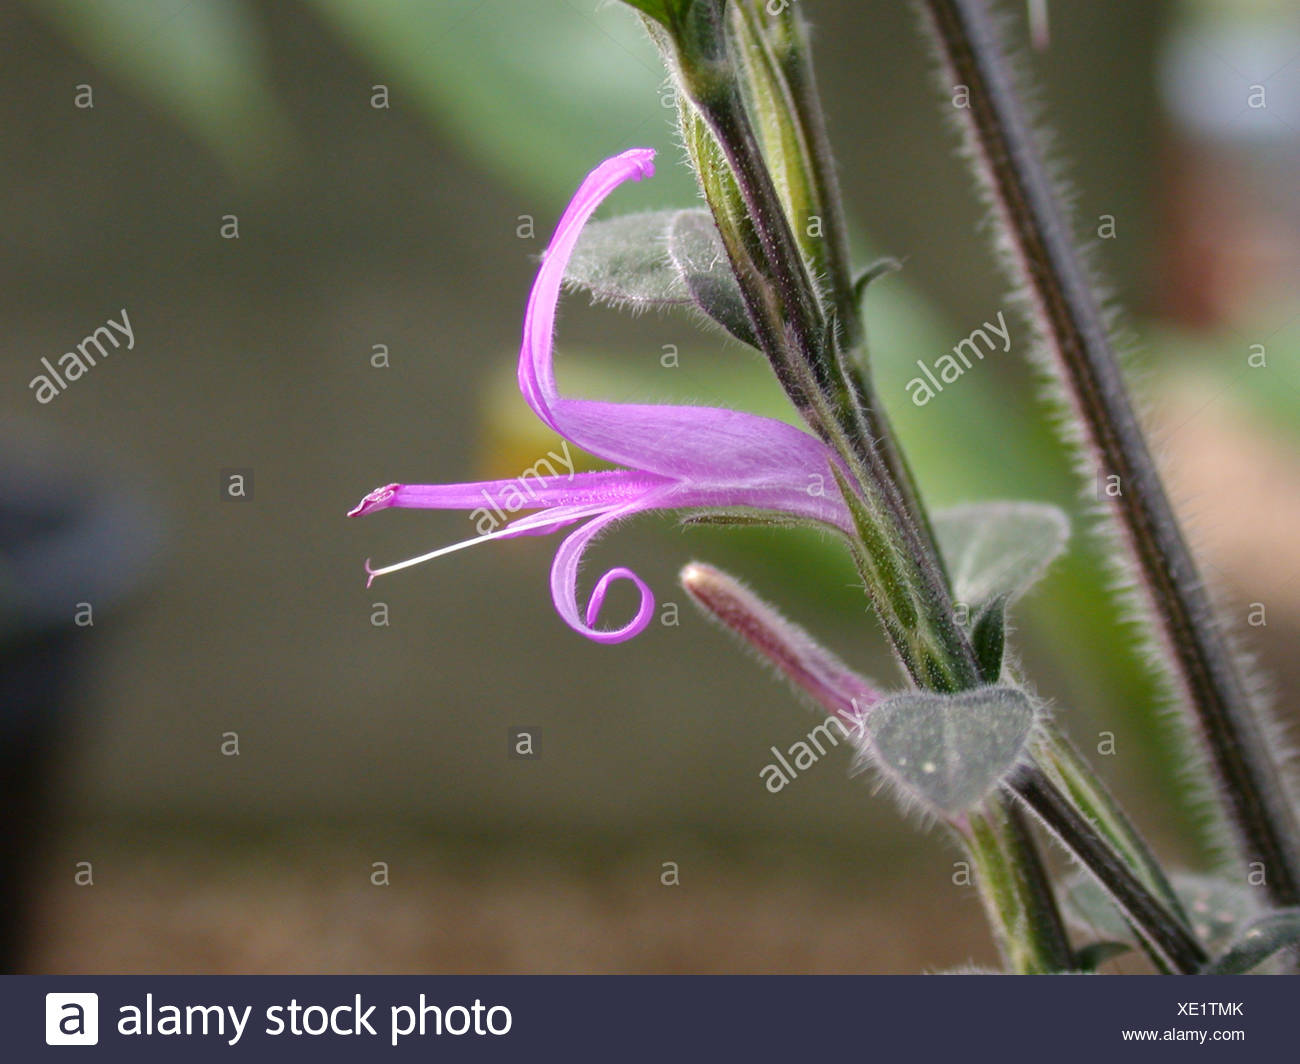 Pink Polka Dot Plant Freckle Face Measles Plant Hypoestes Phyllostachya Flower Stock Photo Alamy,High Efficiency Washer Vs Regular